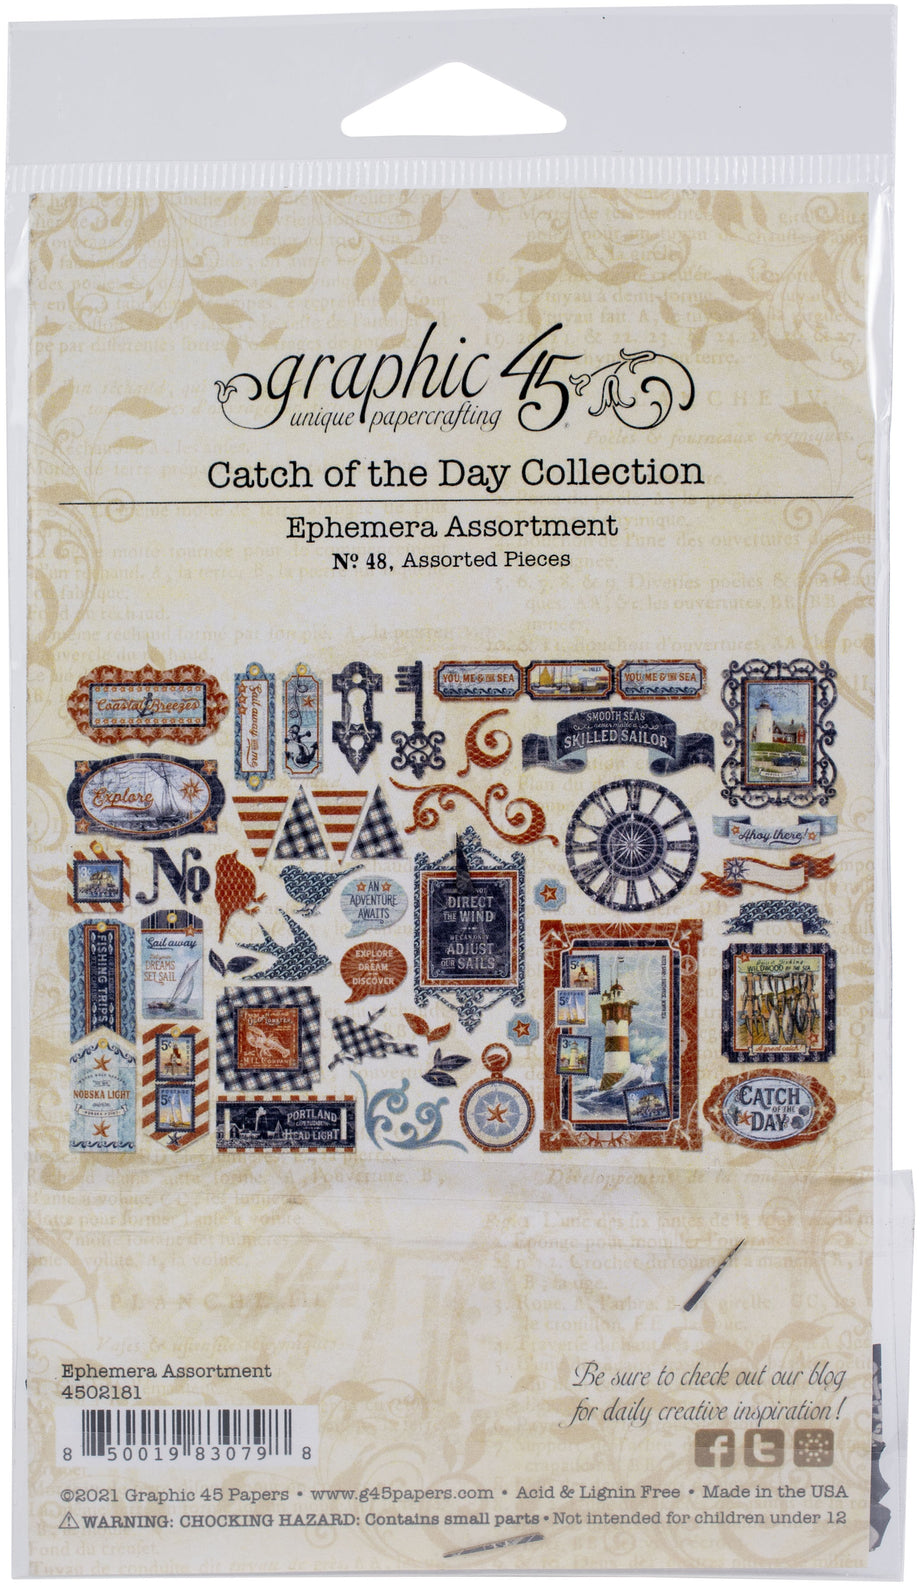 Graphic 45 Paper Collections and Crafts